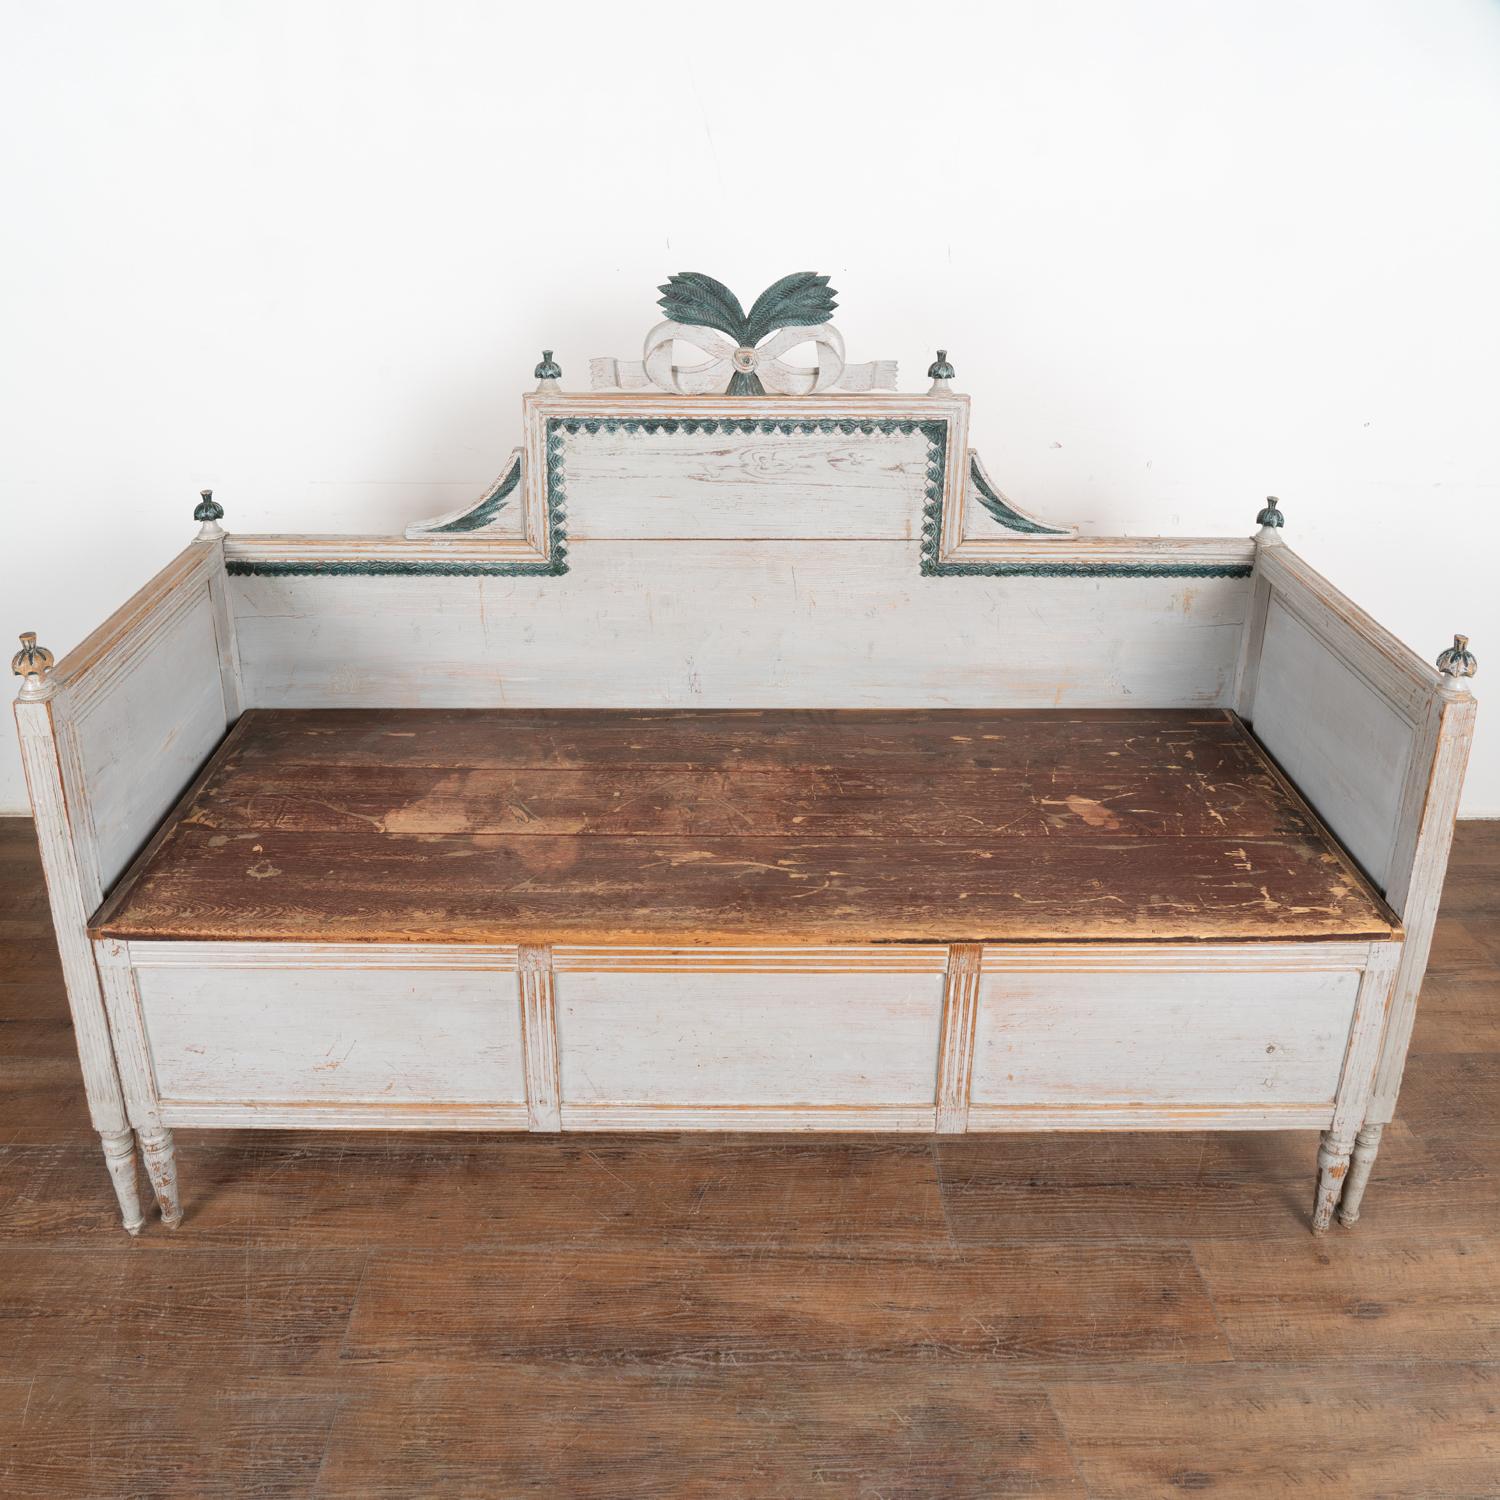 Pine Original Gray Painted Gustavian Bench with Storage, Sweden circa 1820-40 For Sale